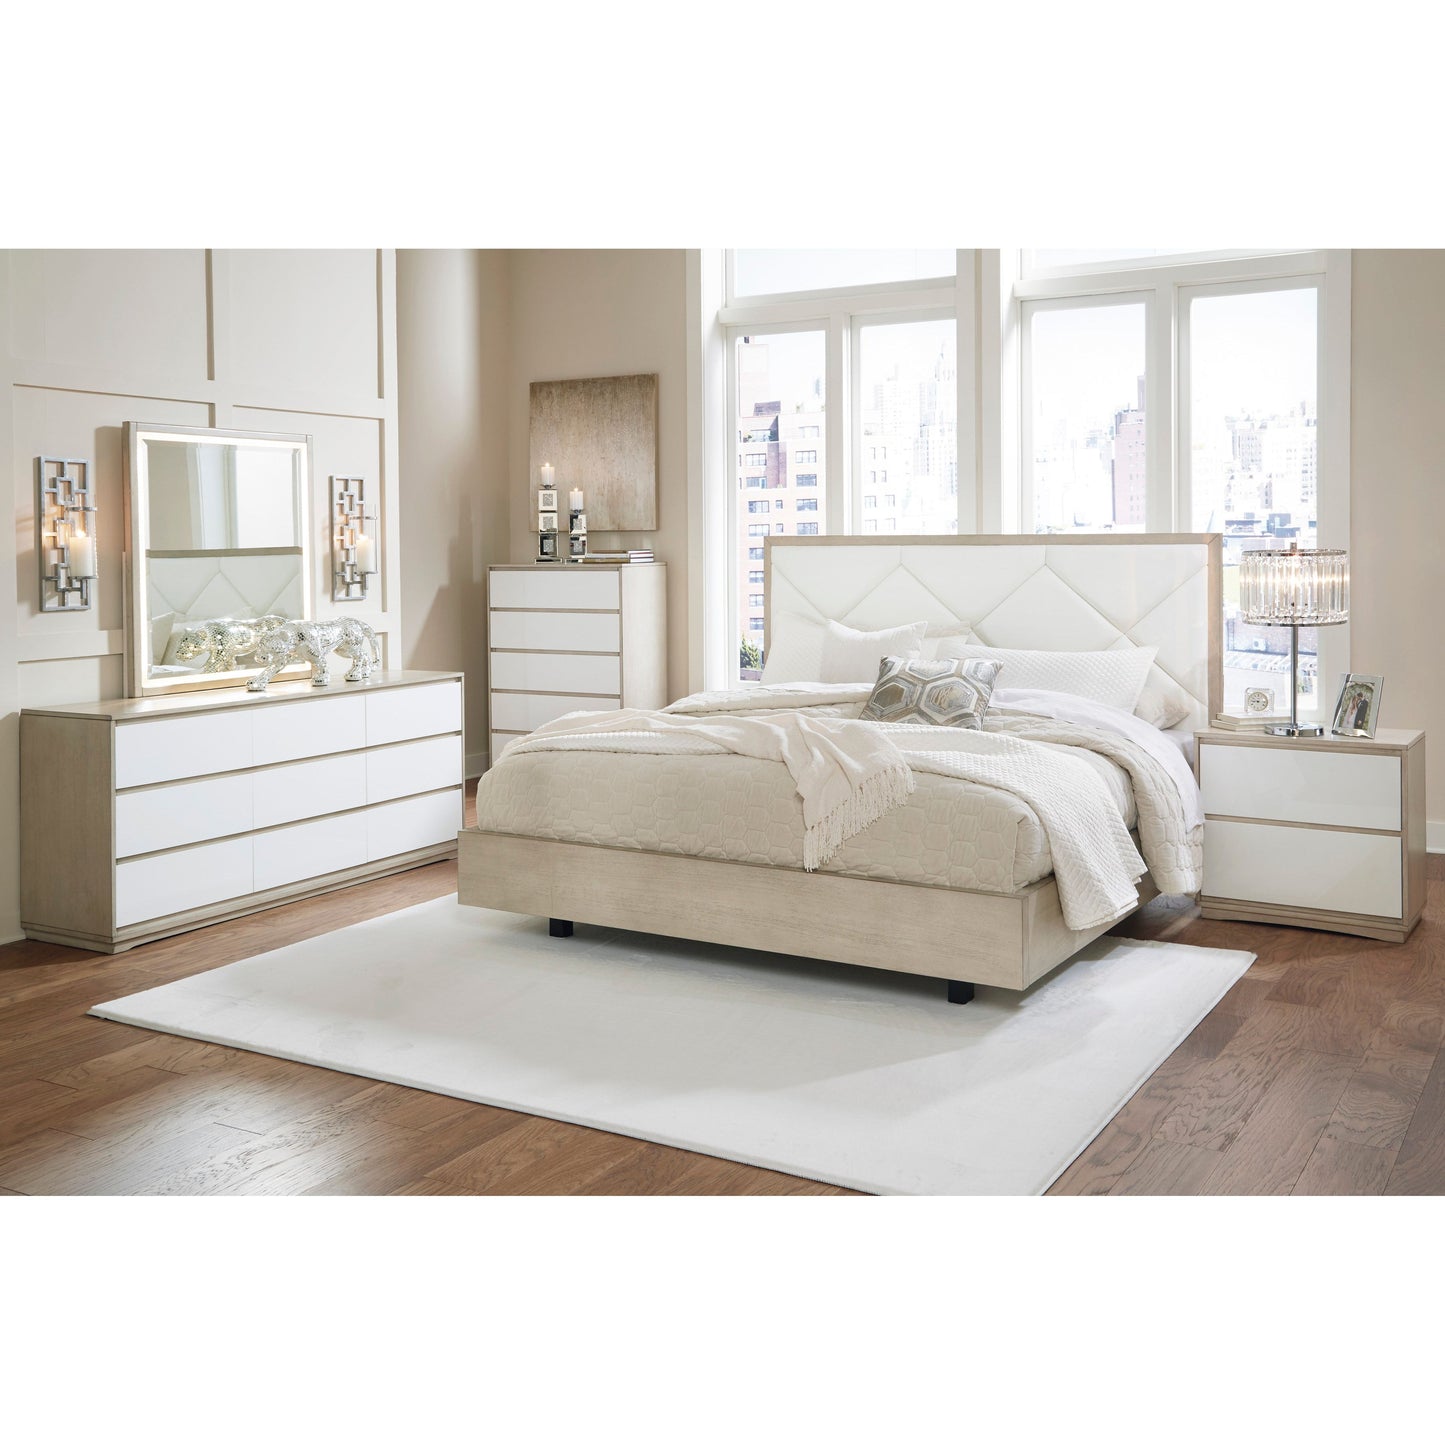 WENDORA UPHOLSTERED BED - BISQUE/ WHITE